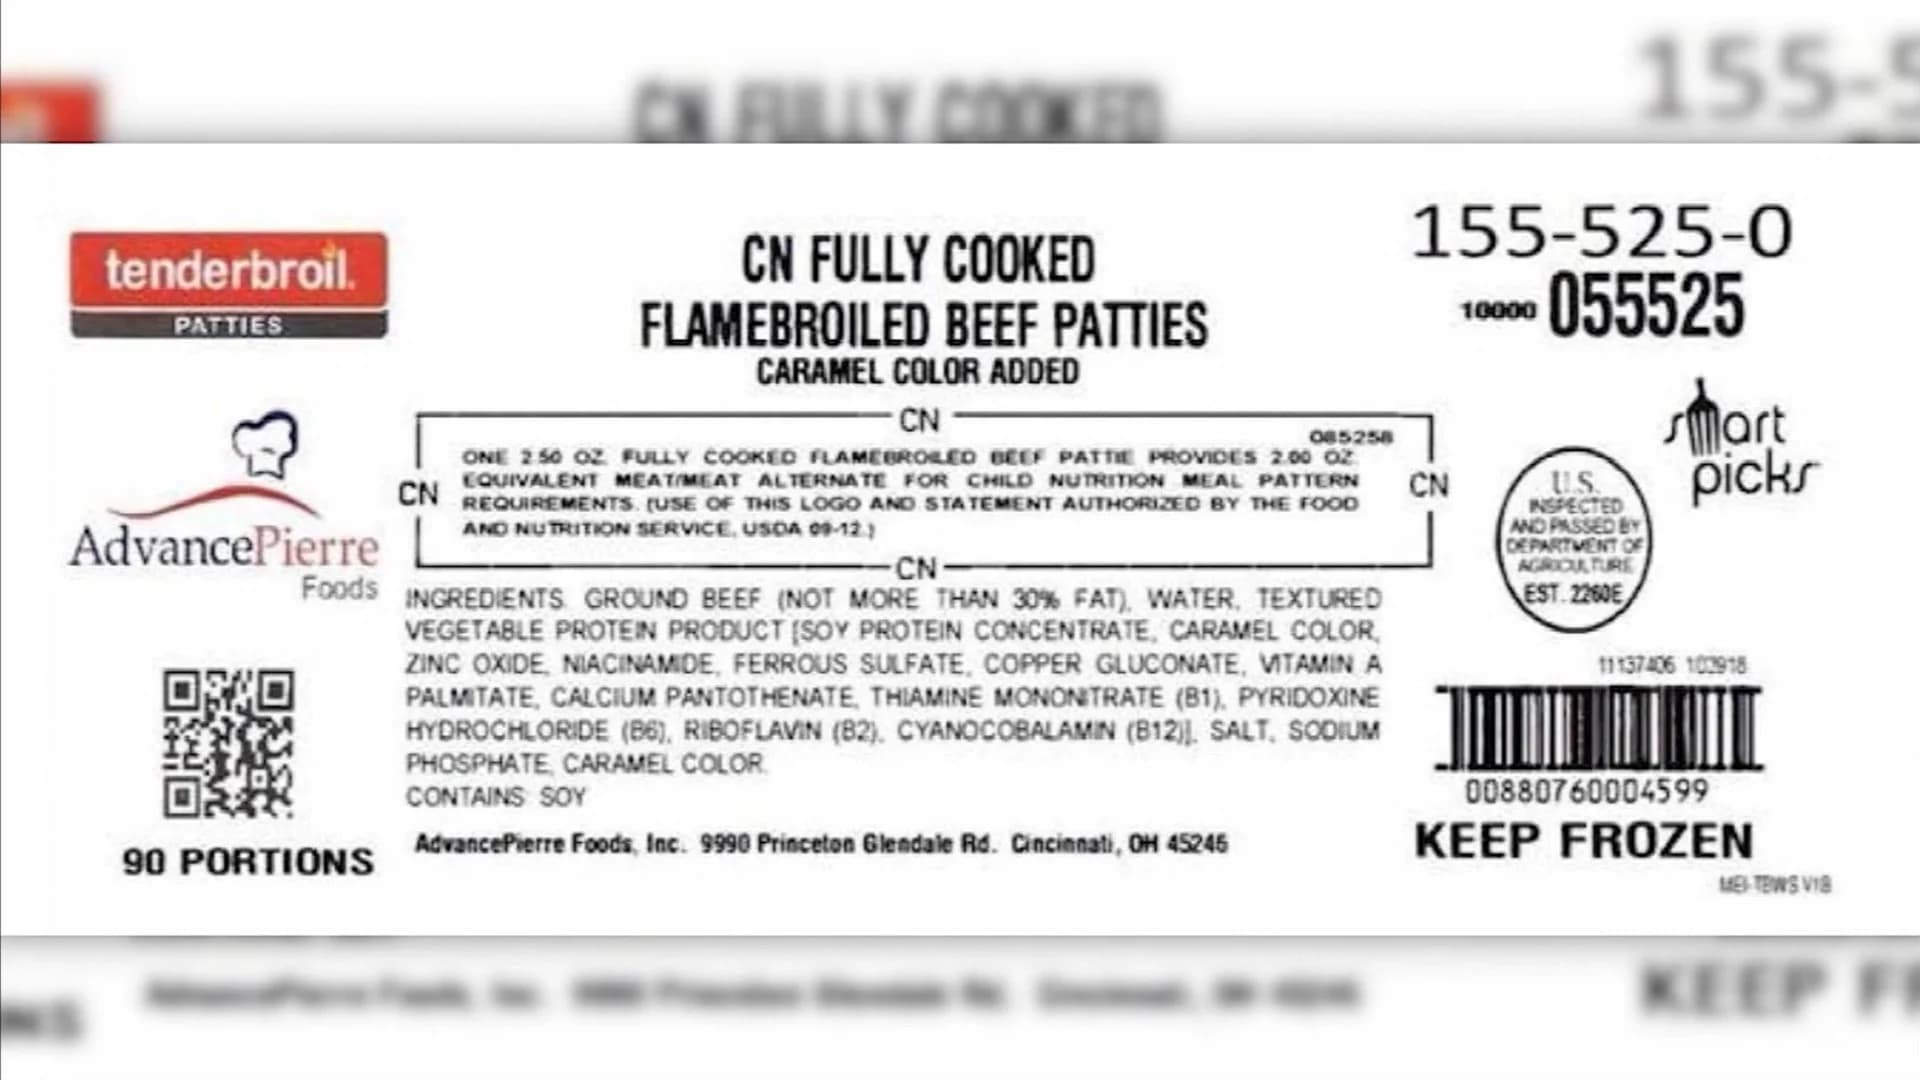 Over 20K pounds of frozen beef patties shipped to schools nationwide recalled